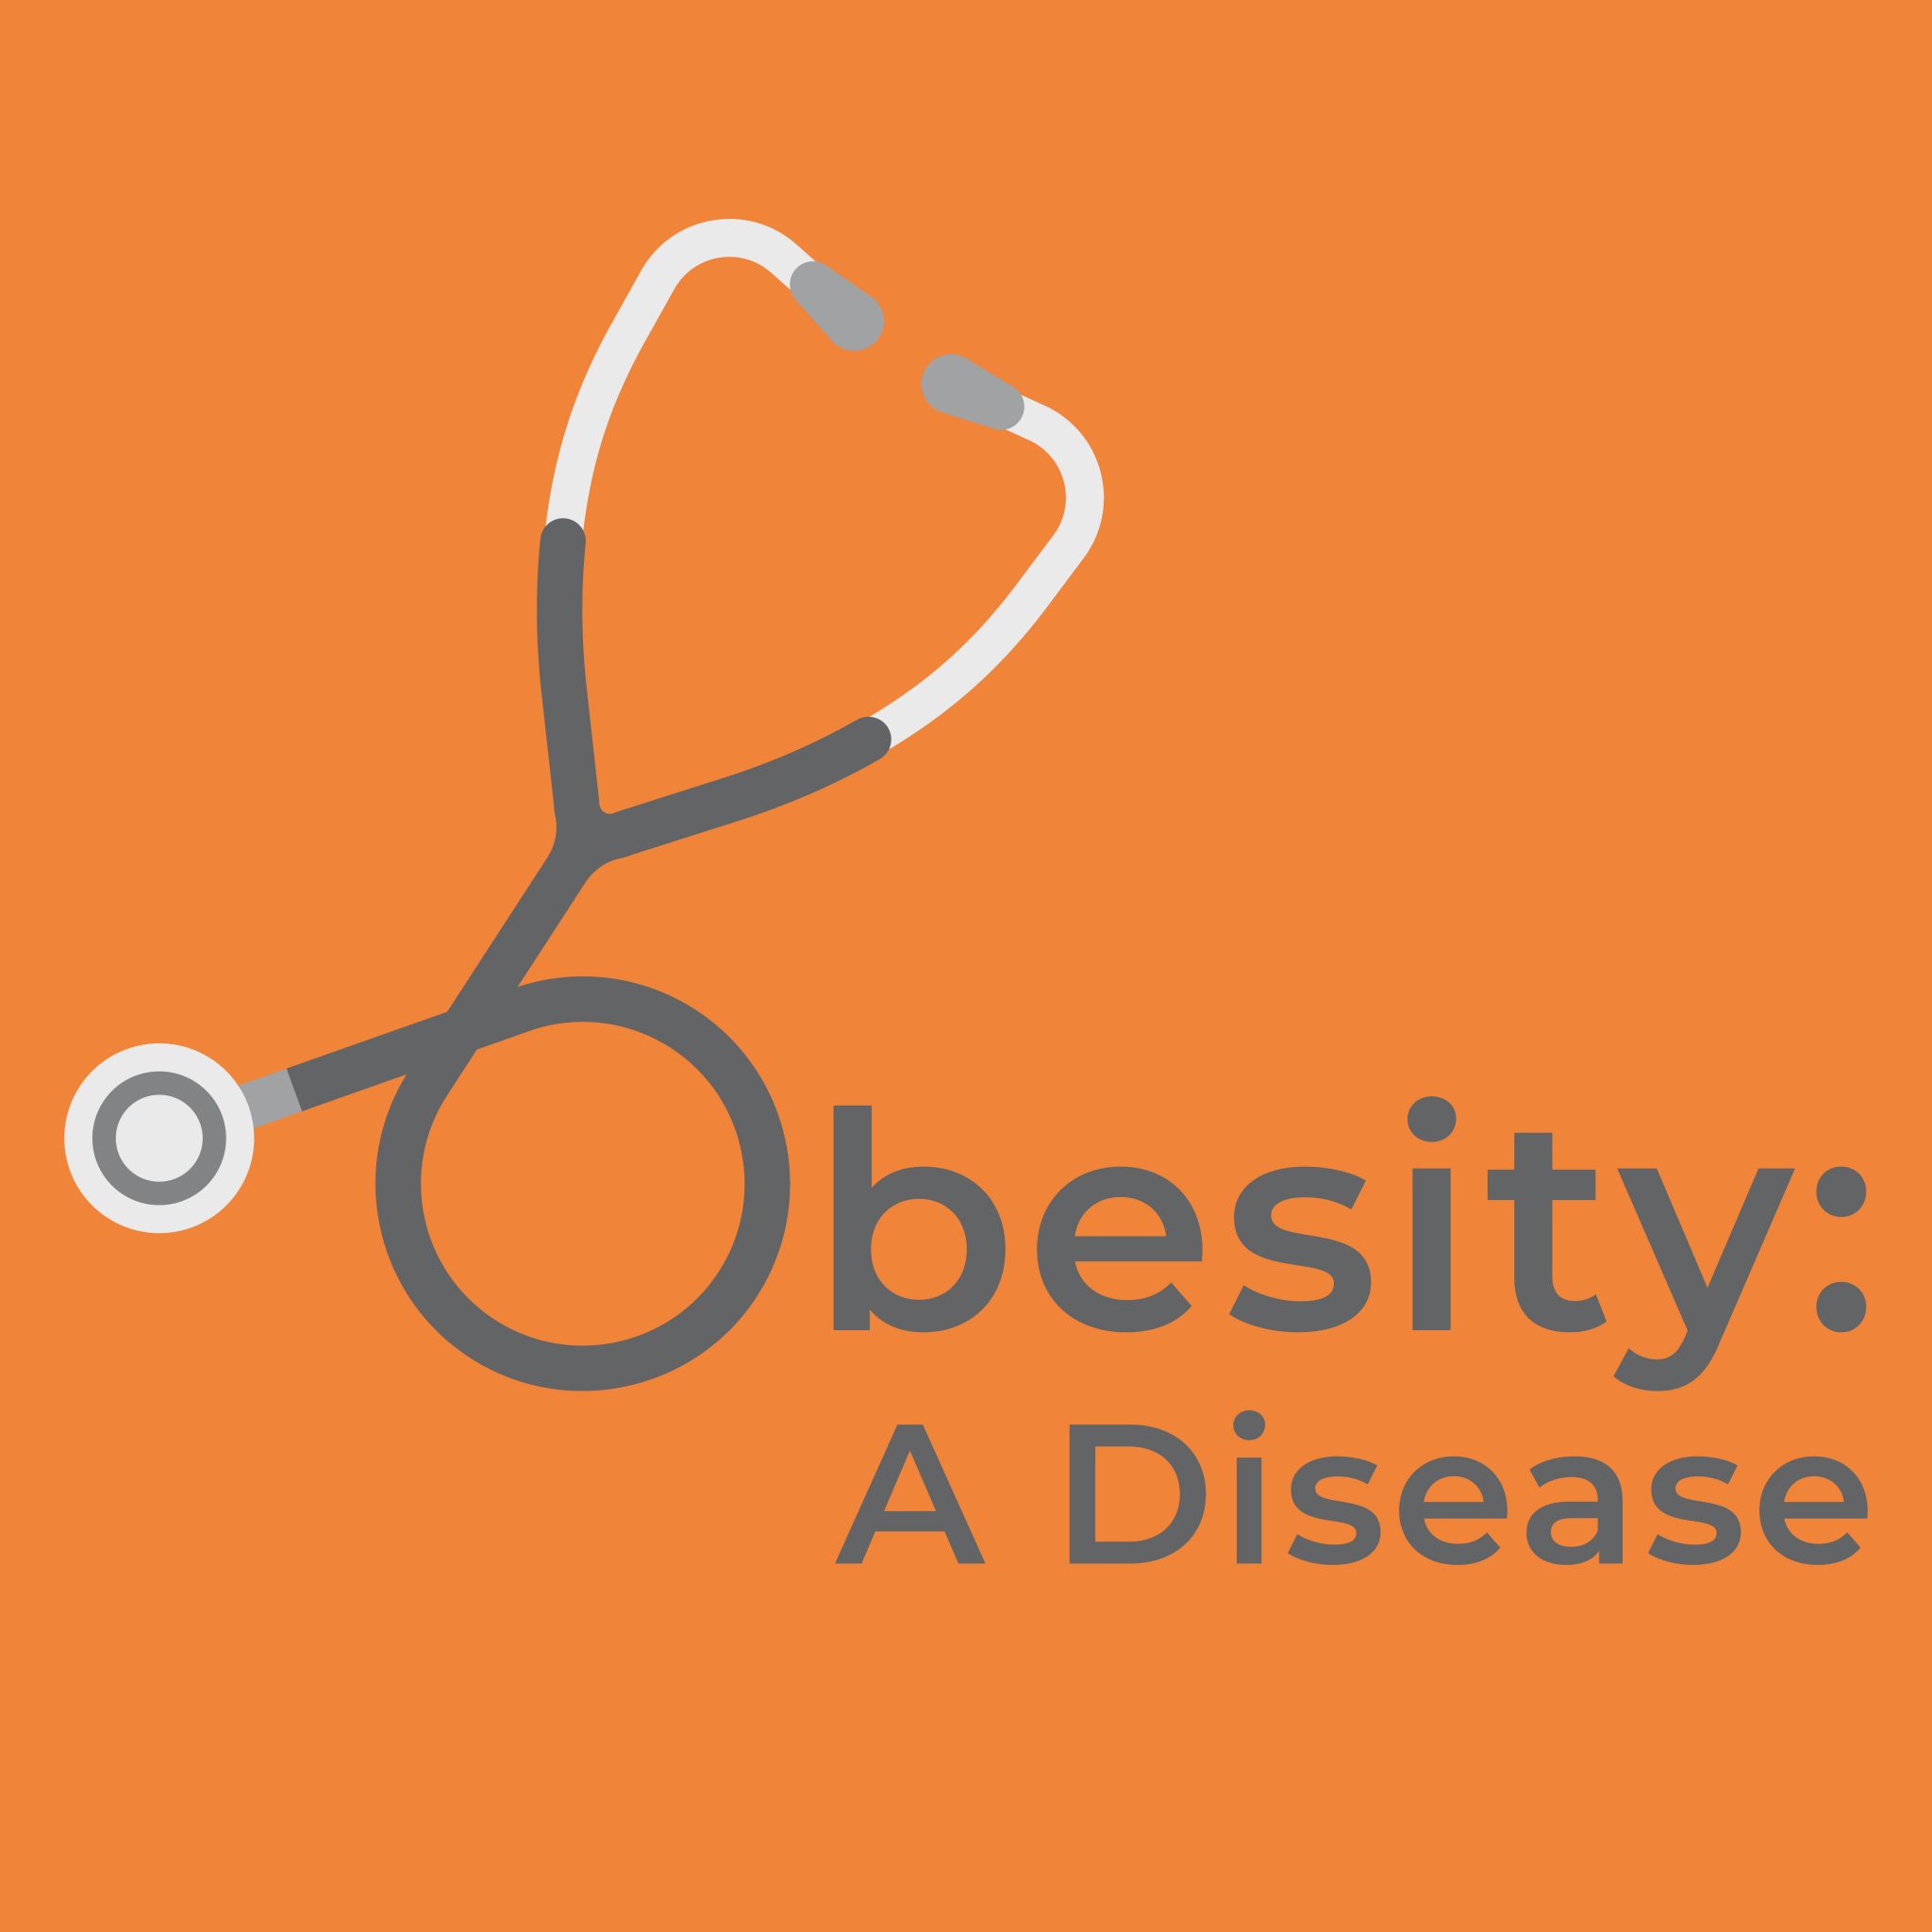 Episode 85: Article Review: Obesity, Diabetes Mellitus, and Cardiometabolic Risk with Dr. Bindlish, Part 1 of 3